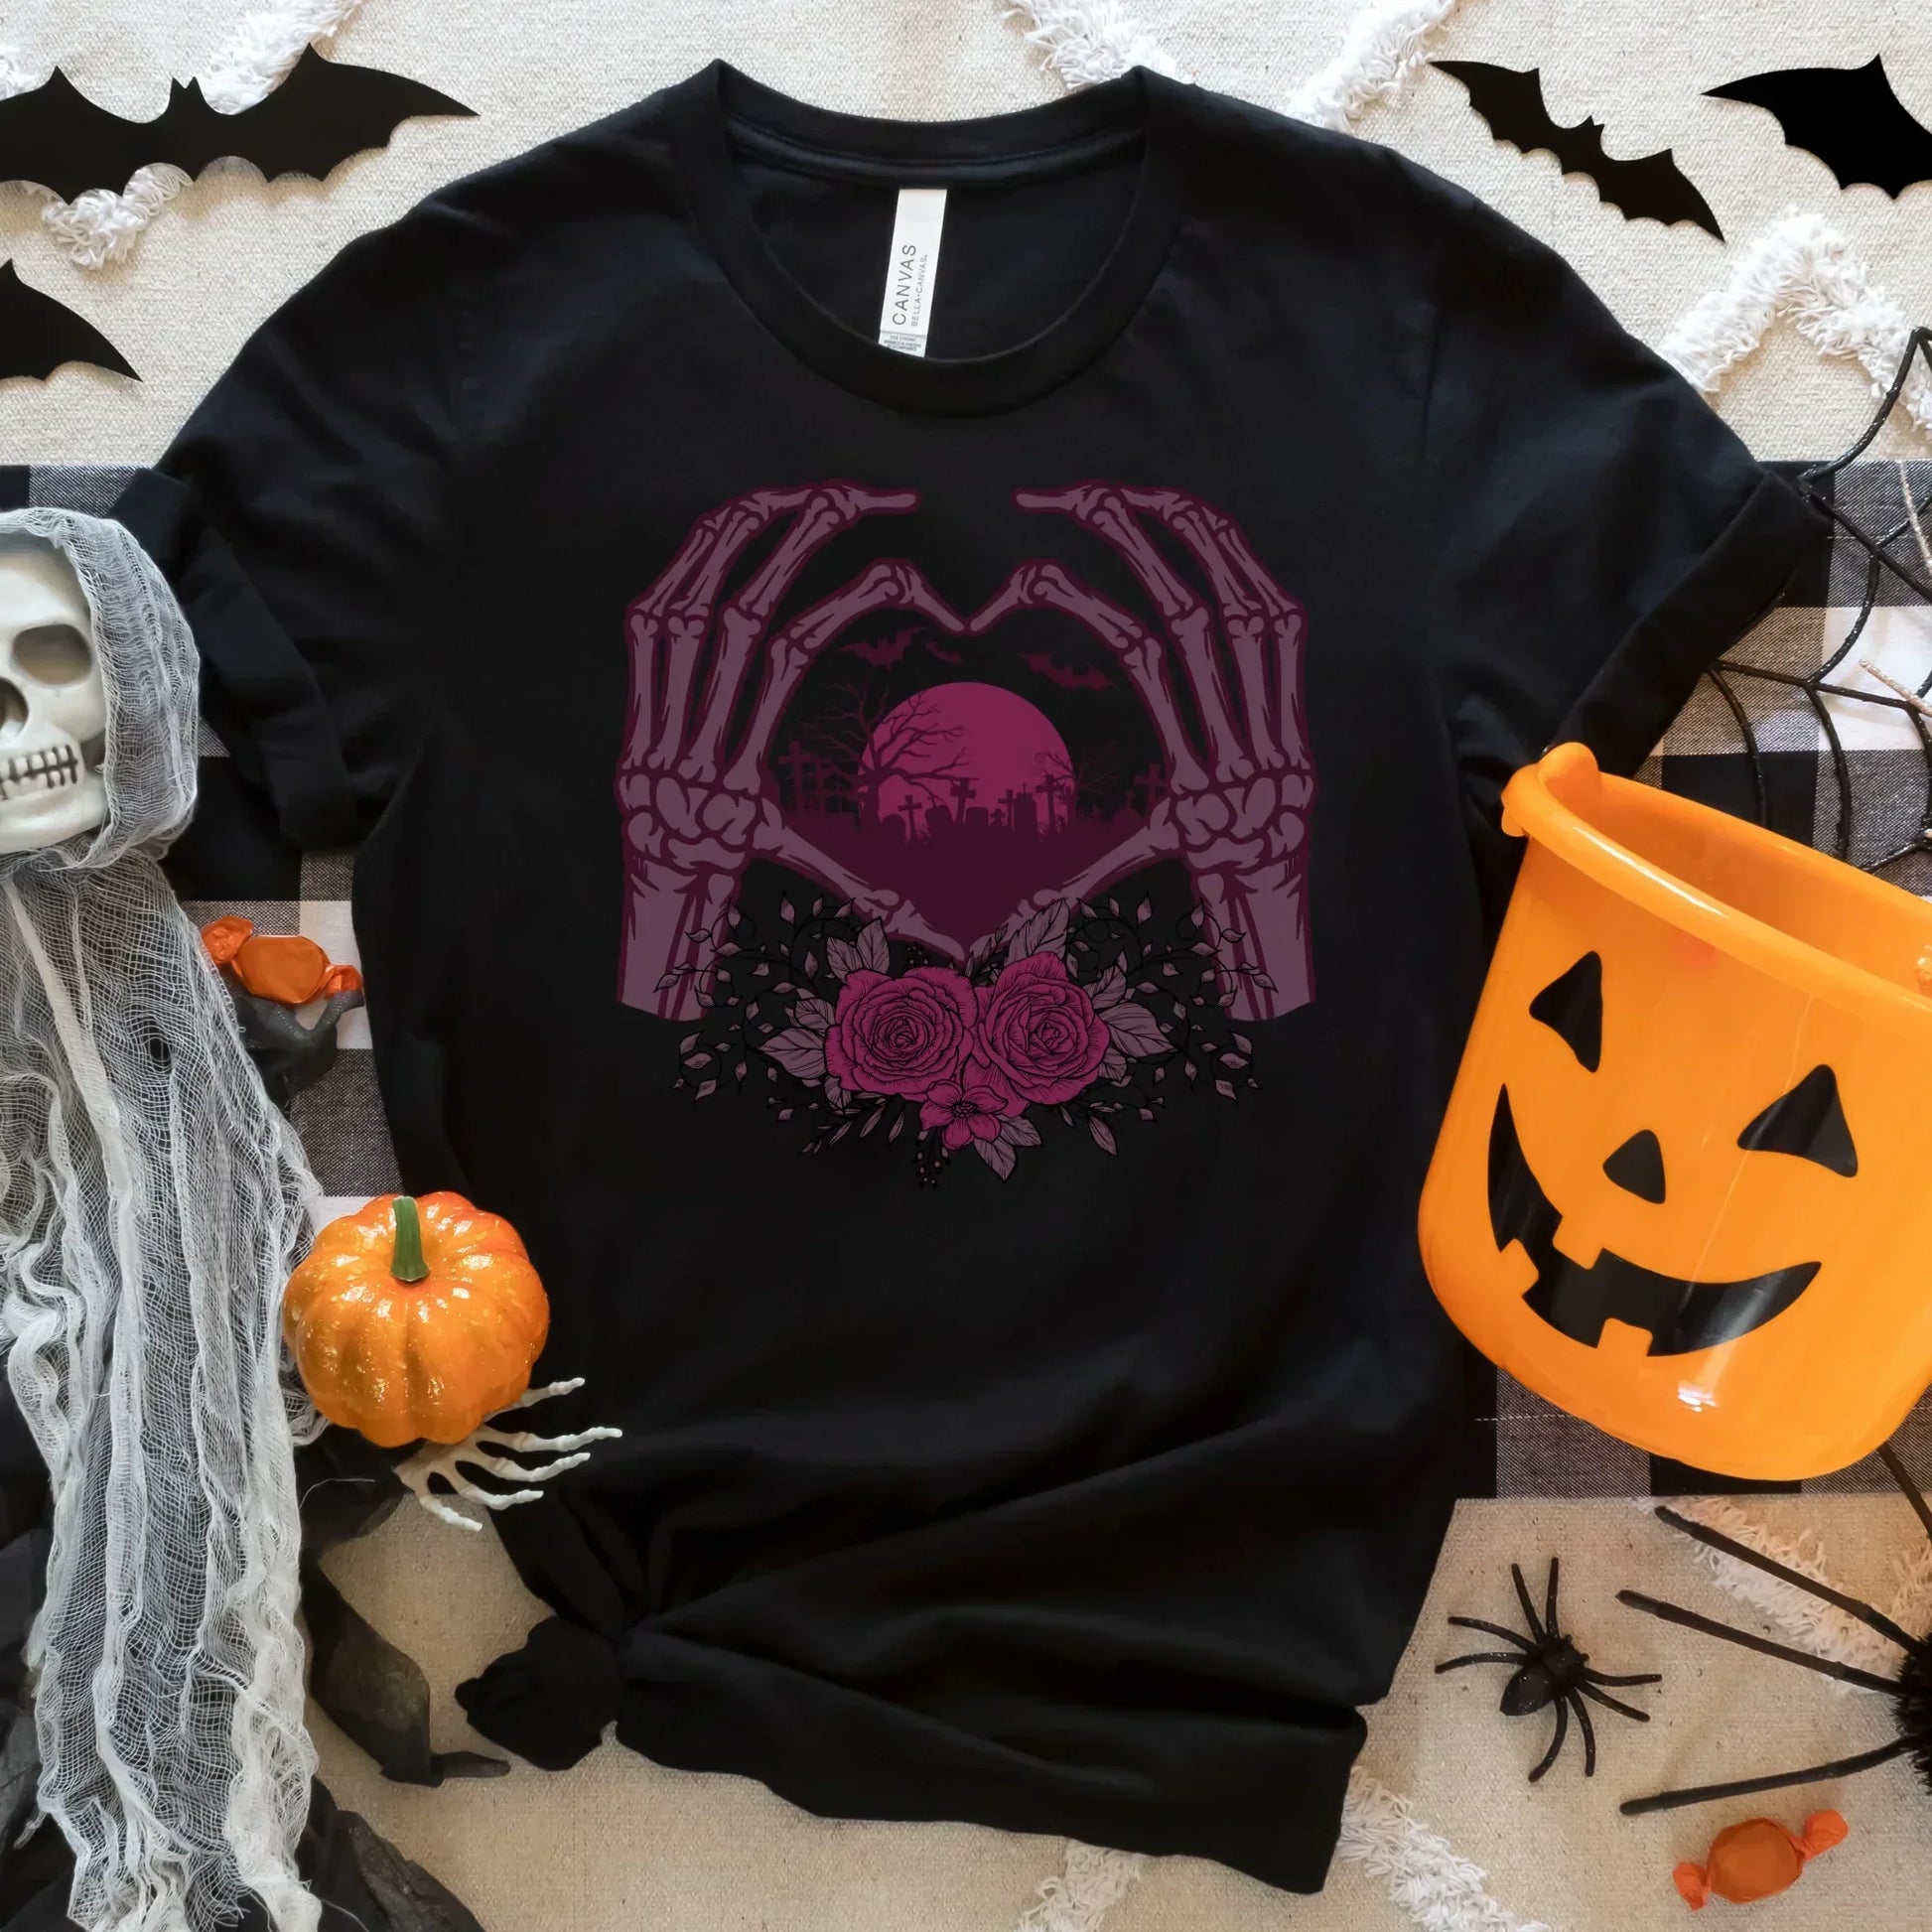 Witchy Woman Spooky Halloween Shirt With Witchy Vibes, Feeling Witchy Moon Shirt, Magical Witch Shirt, Goth Style Gothic Shirt For Halloween